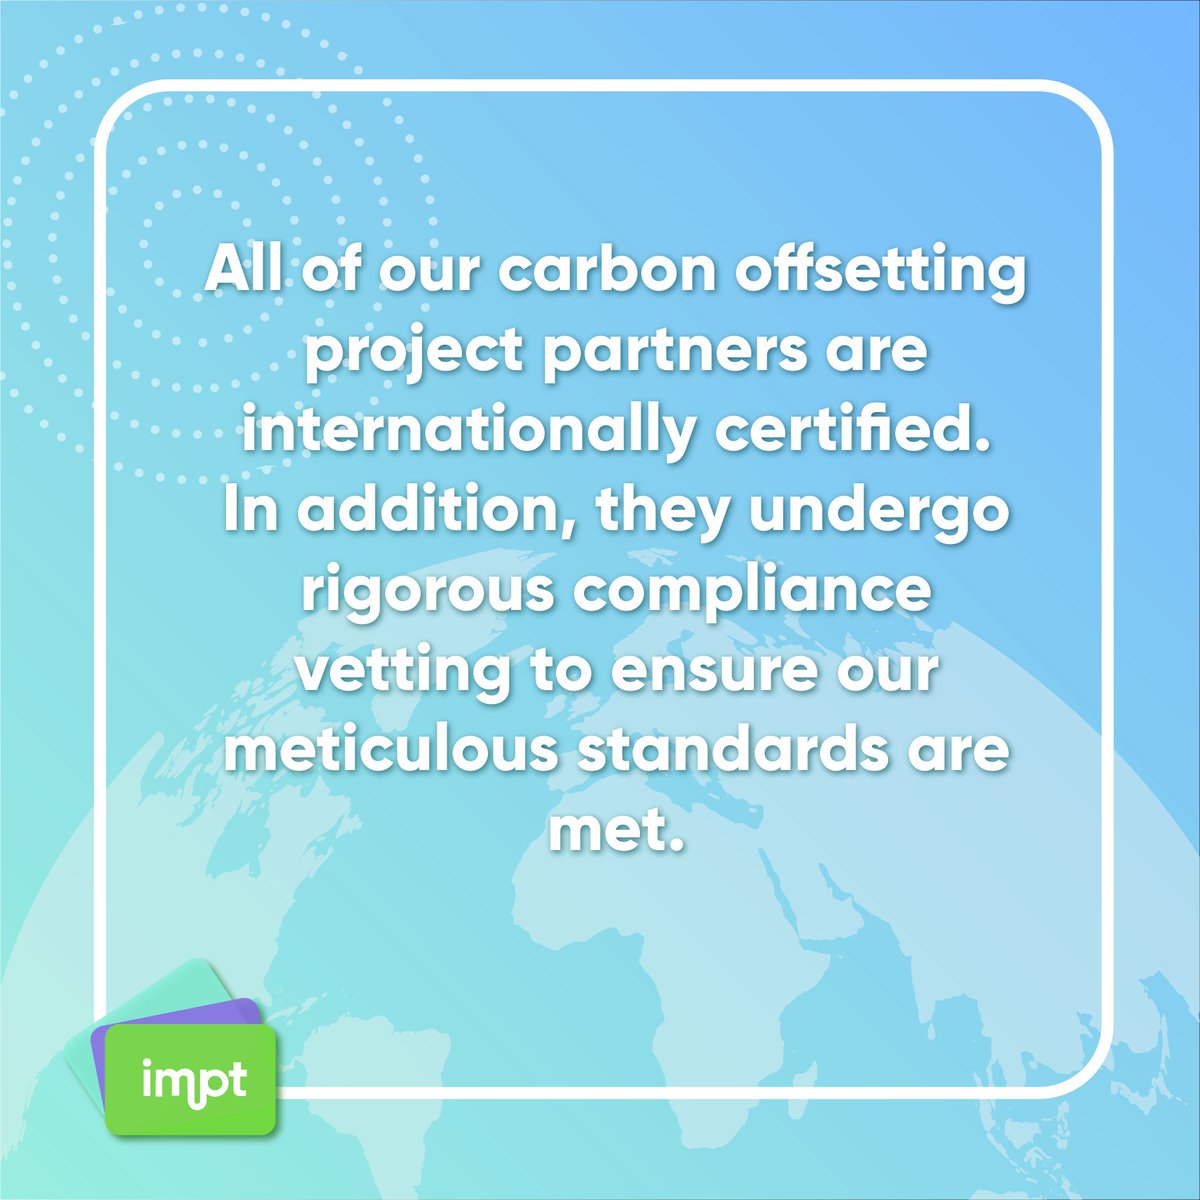 Offset your carbon footprint with ease through IMPT. 🌱 

Take action today to reduce your environmental impact and create a greener world. 

Learn more at impt.io. #CarbonOffsetting #IMPT #Sustainability